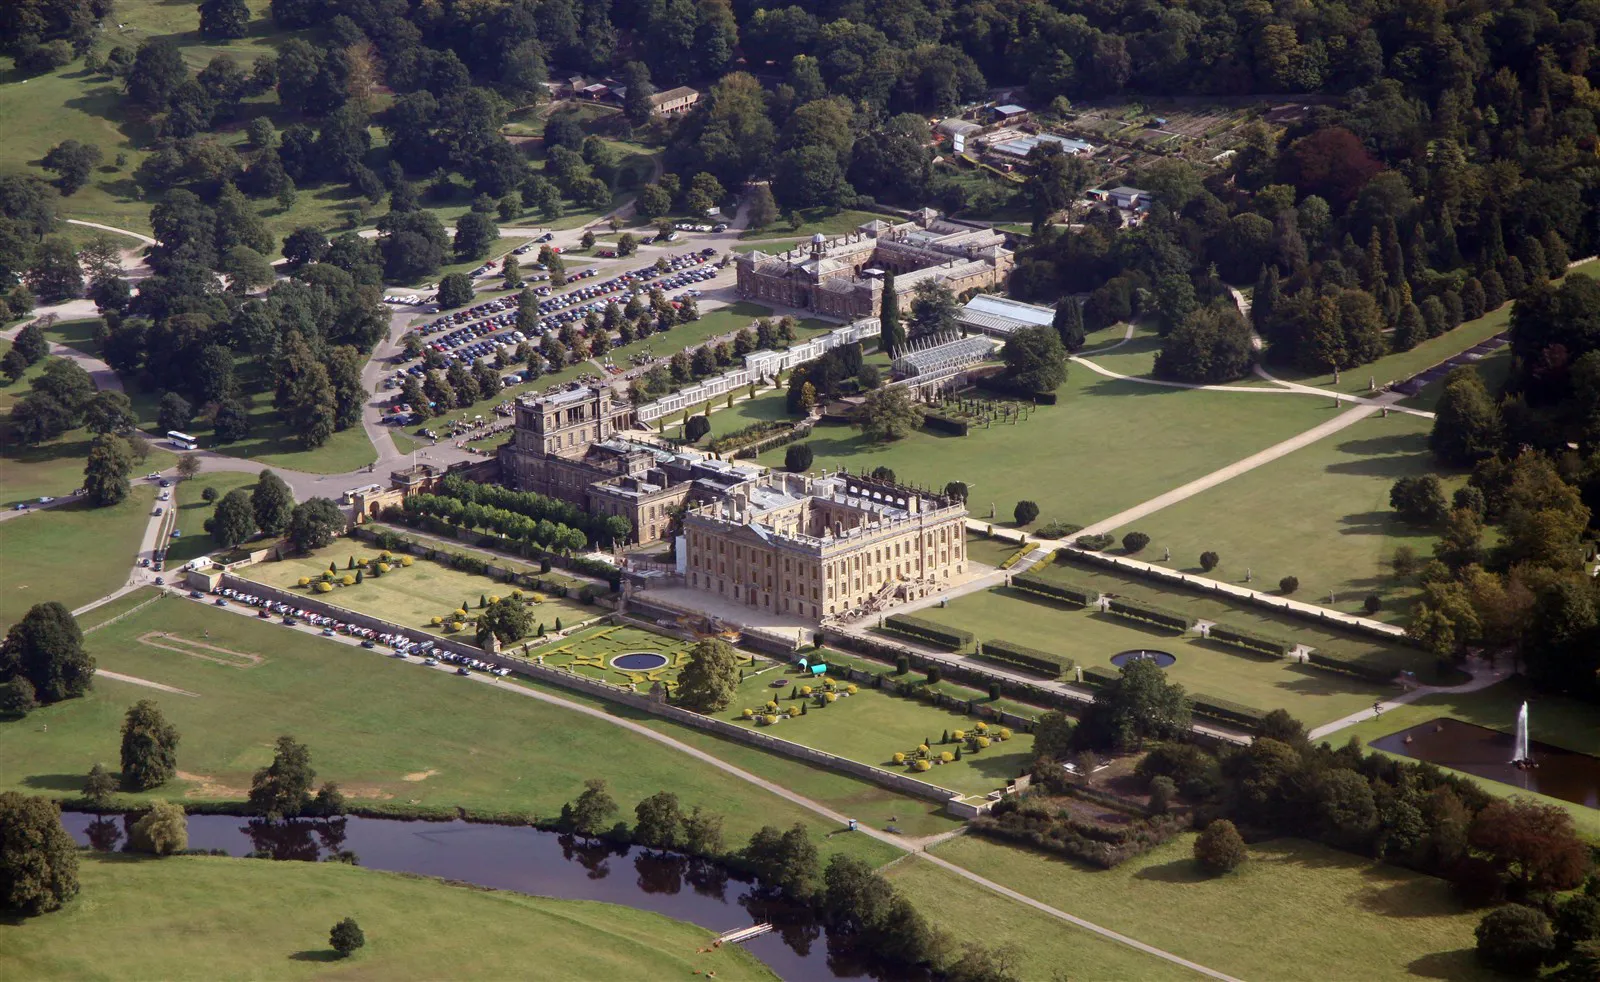 How to make the most of Chatsworth House events